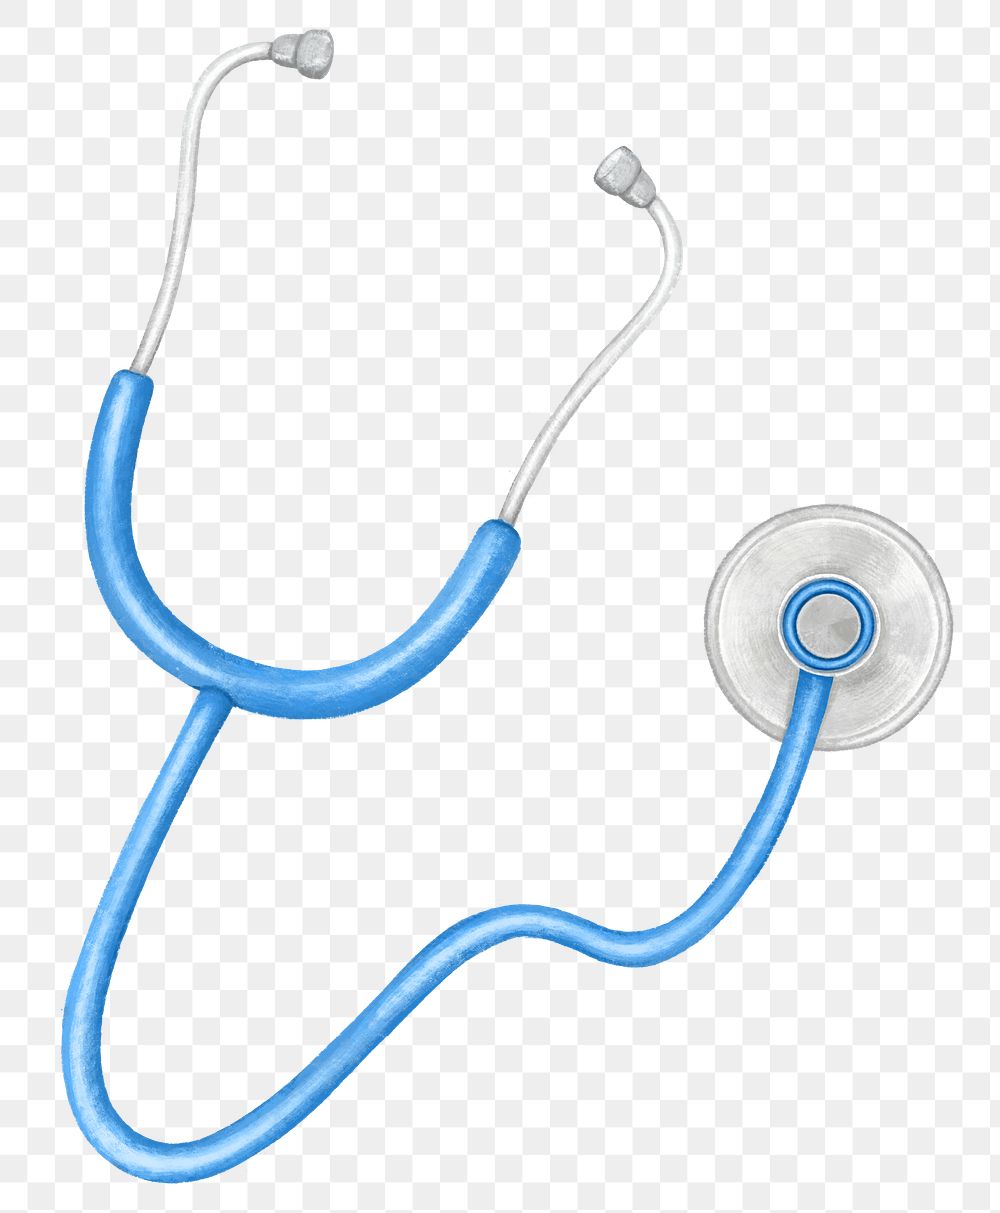 Doctor stethoscope png, transparent background | Premium PNG - rawpixel